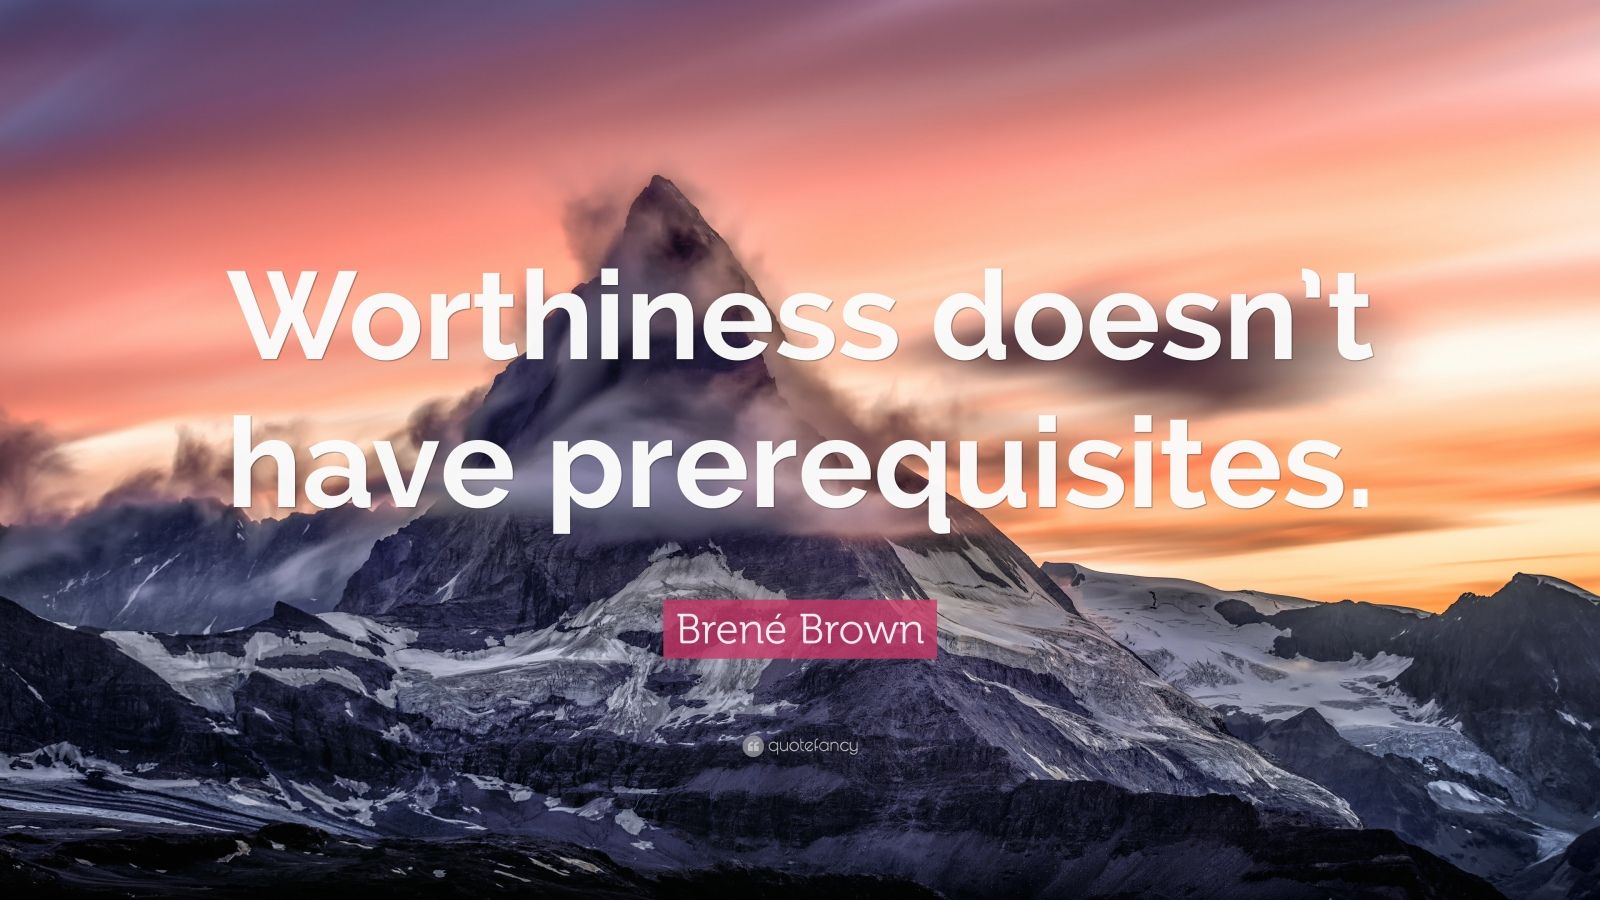 Brené Brown Quote: “Worthiness doesn’t have prerequisites ...